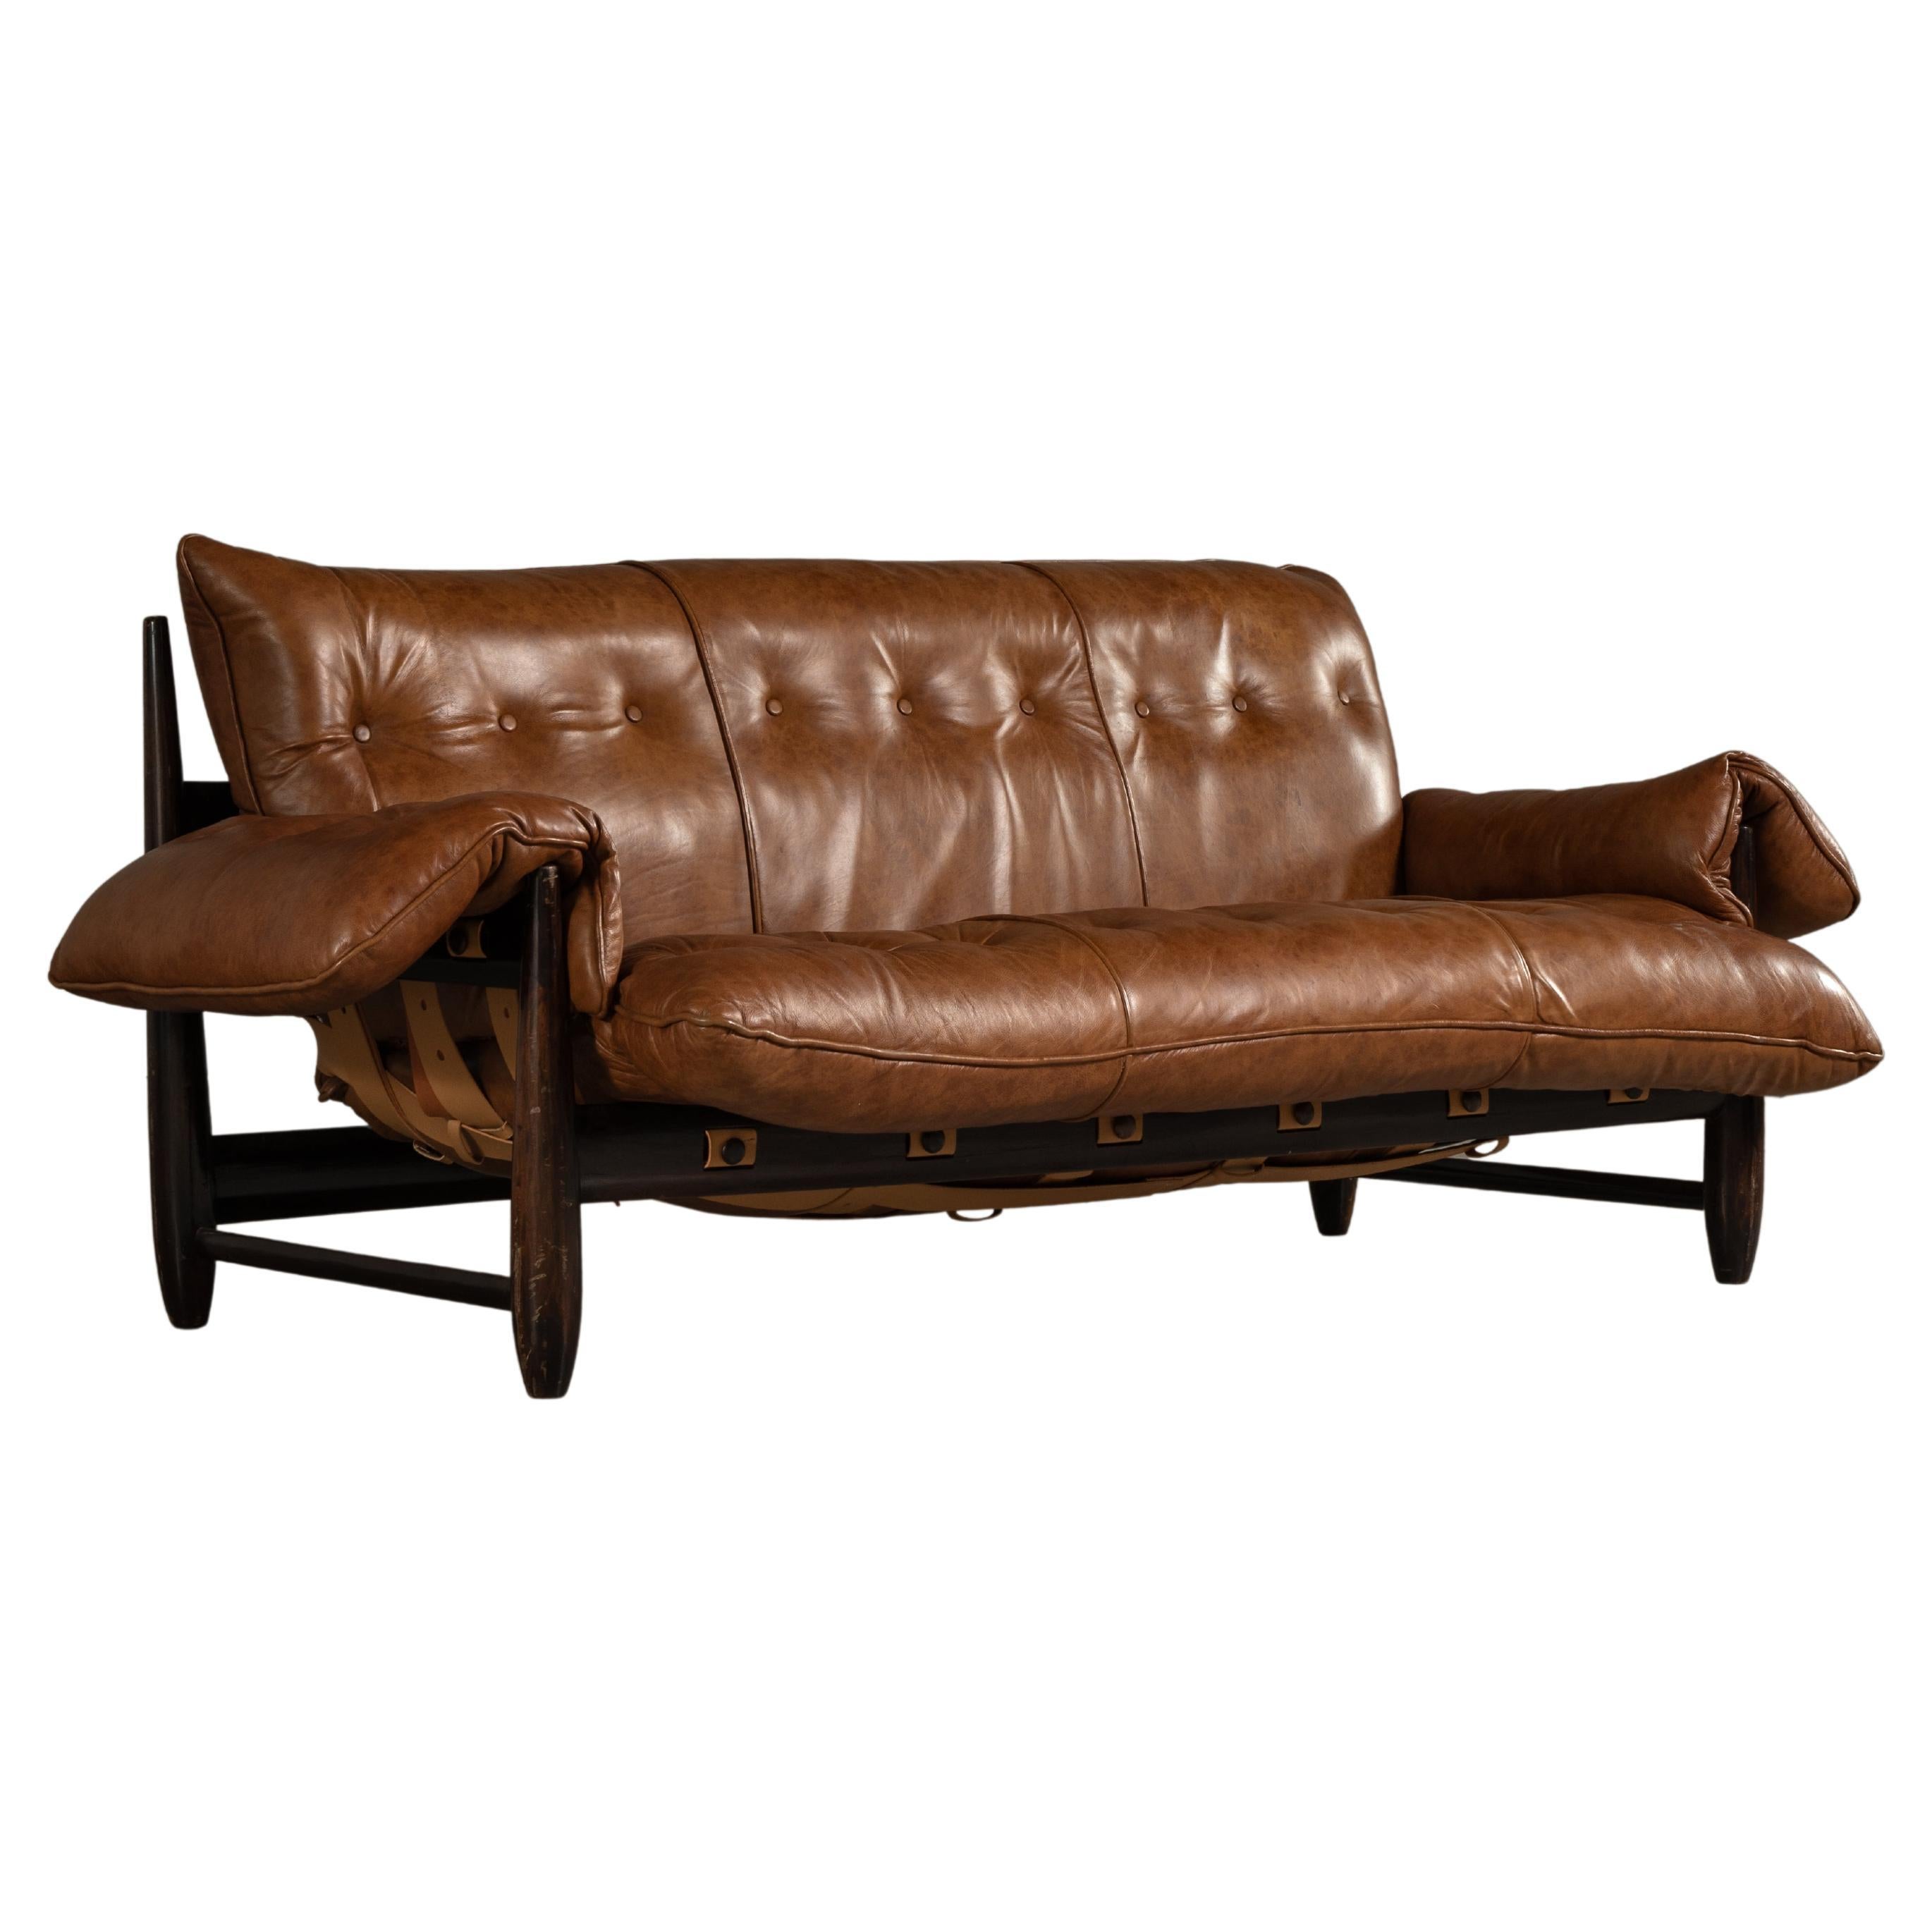 'Mole' Sofa in Leather, By Sergio Rodrigues, Brazilian Mid-Century Modern For Sale